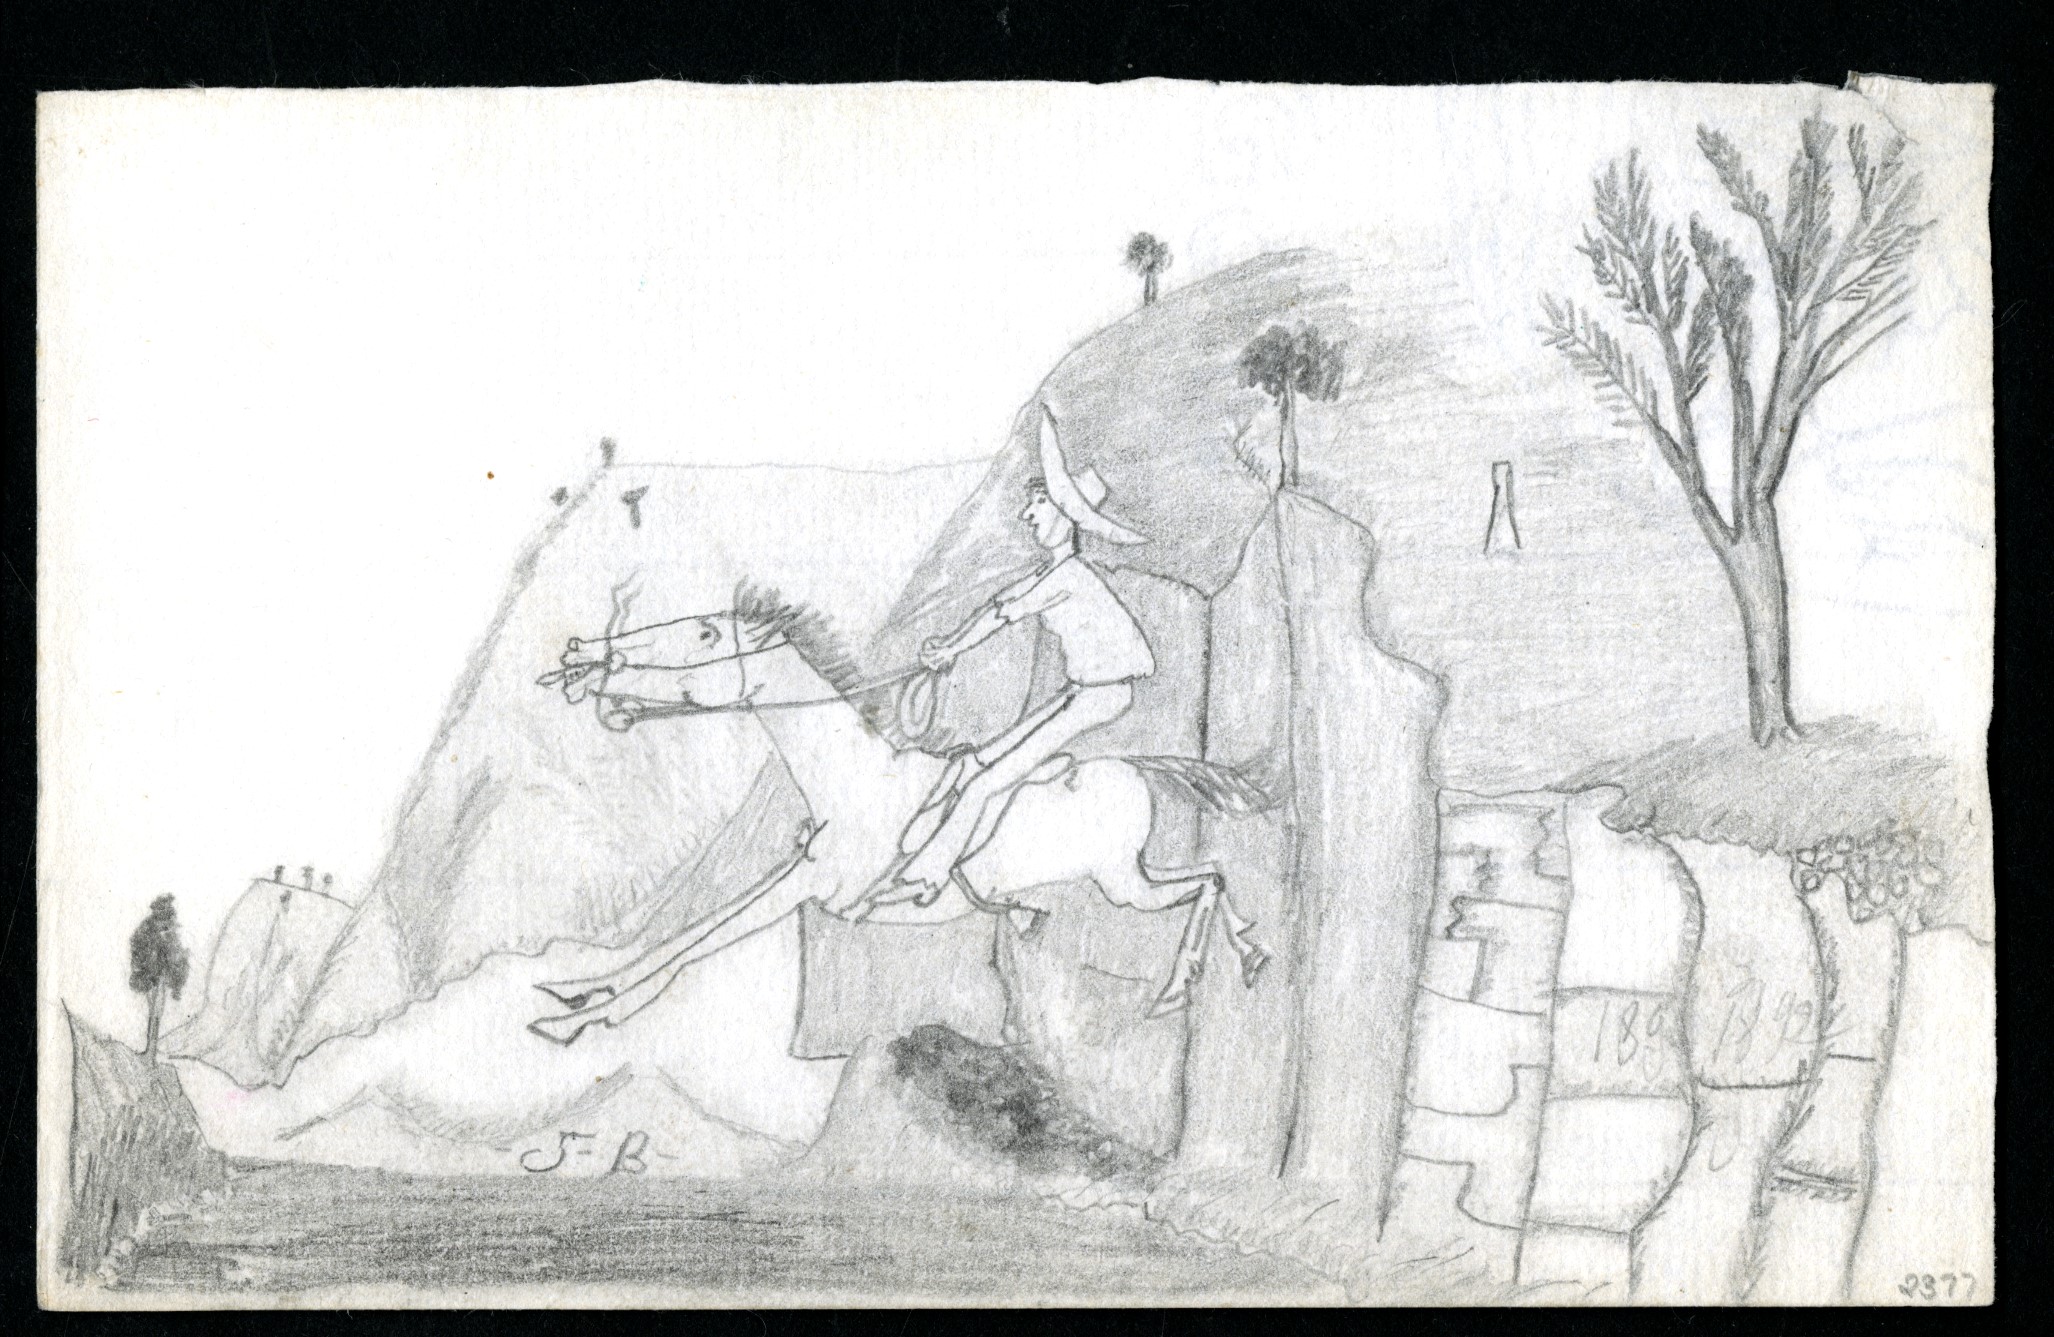 pencil drawing on paper of man riding a horse astride behind a rugged landscape